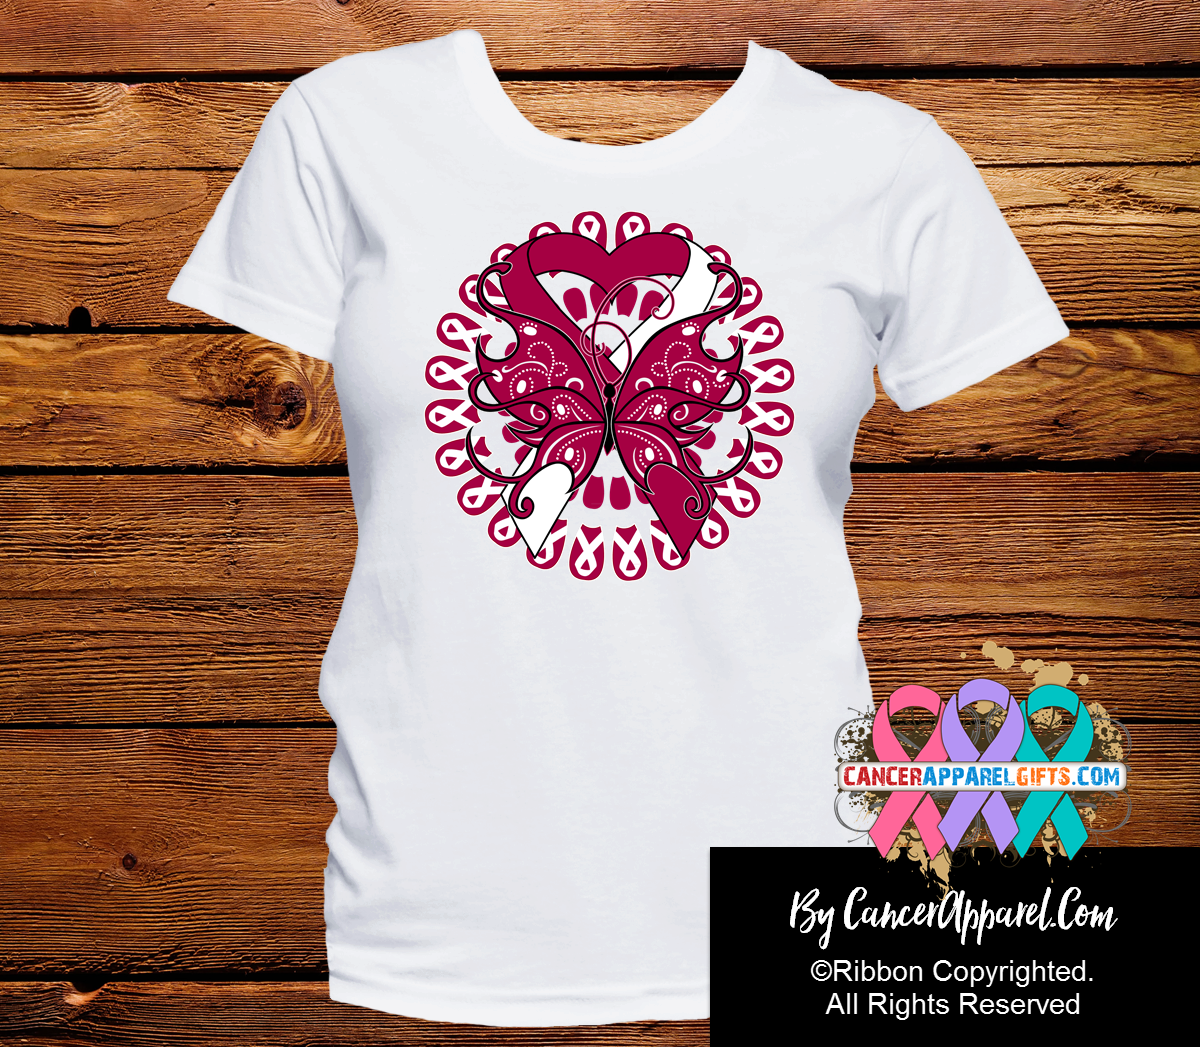 Head Neck Cancer Stunning Butterfly Shirts - Cancer Apparel and Gifts